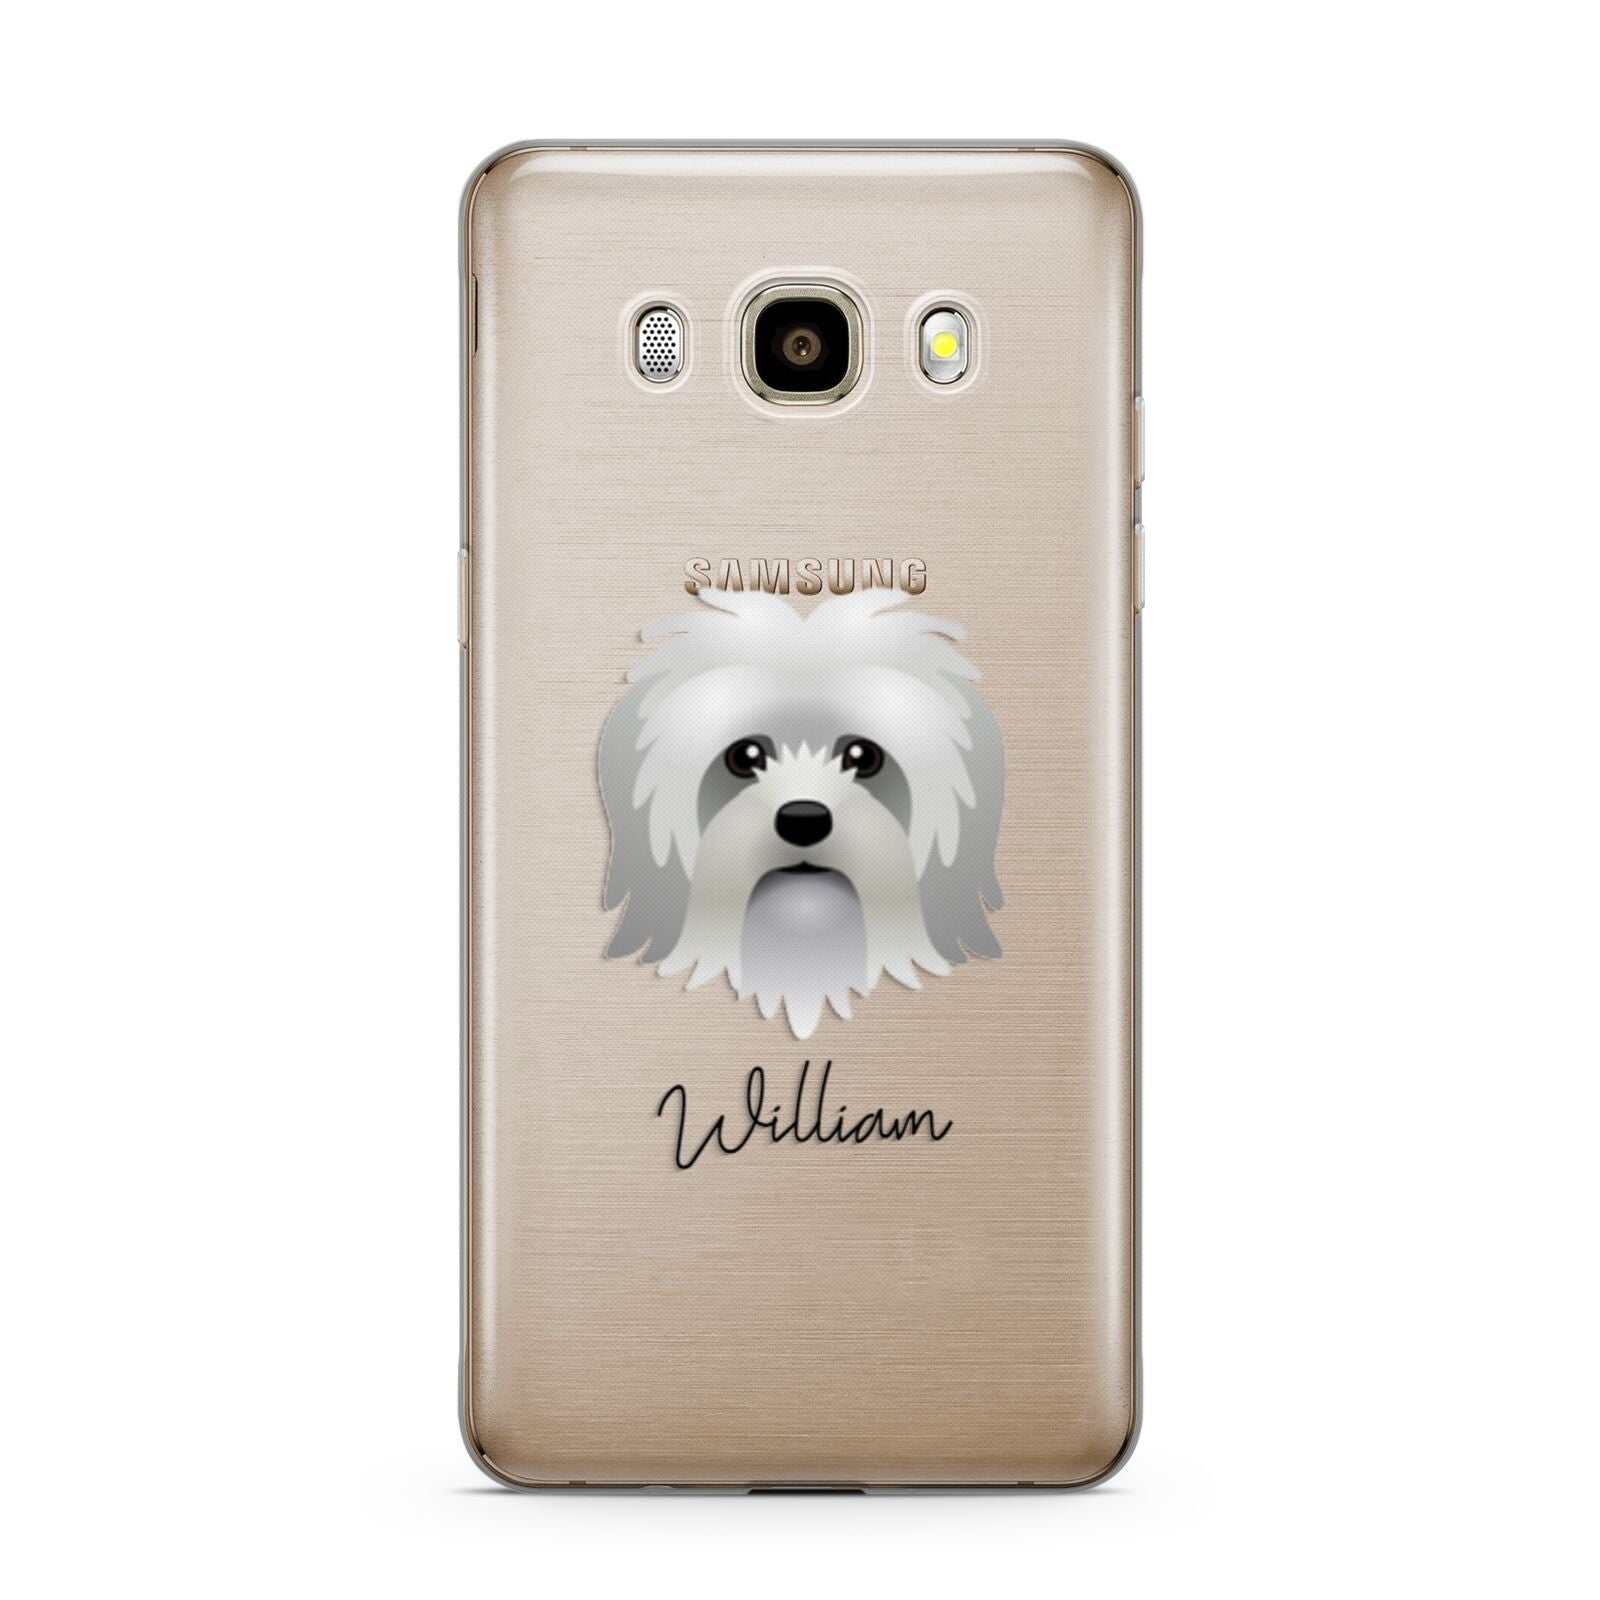 Lo wchen Personalised Samsung Galaxy J7 2016 Case on gold phone